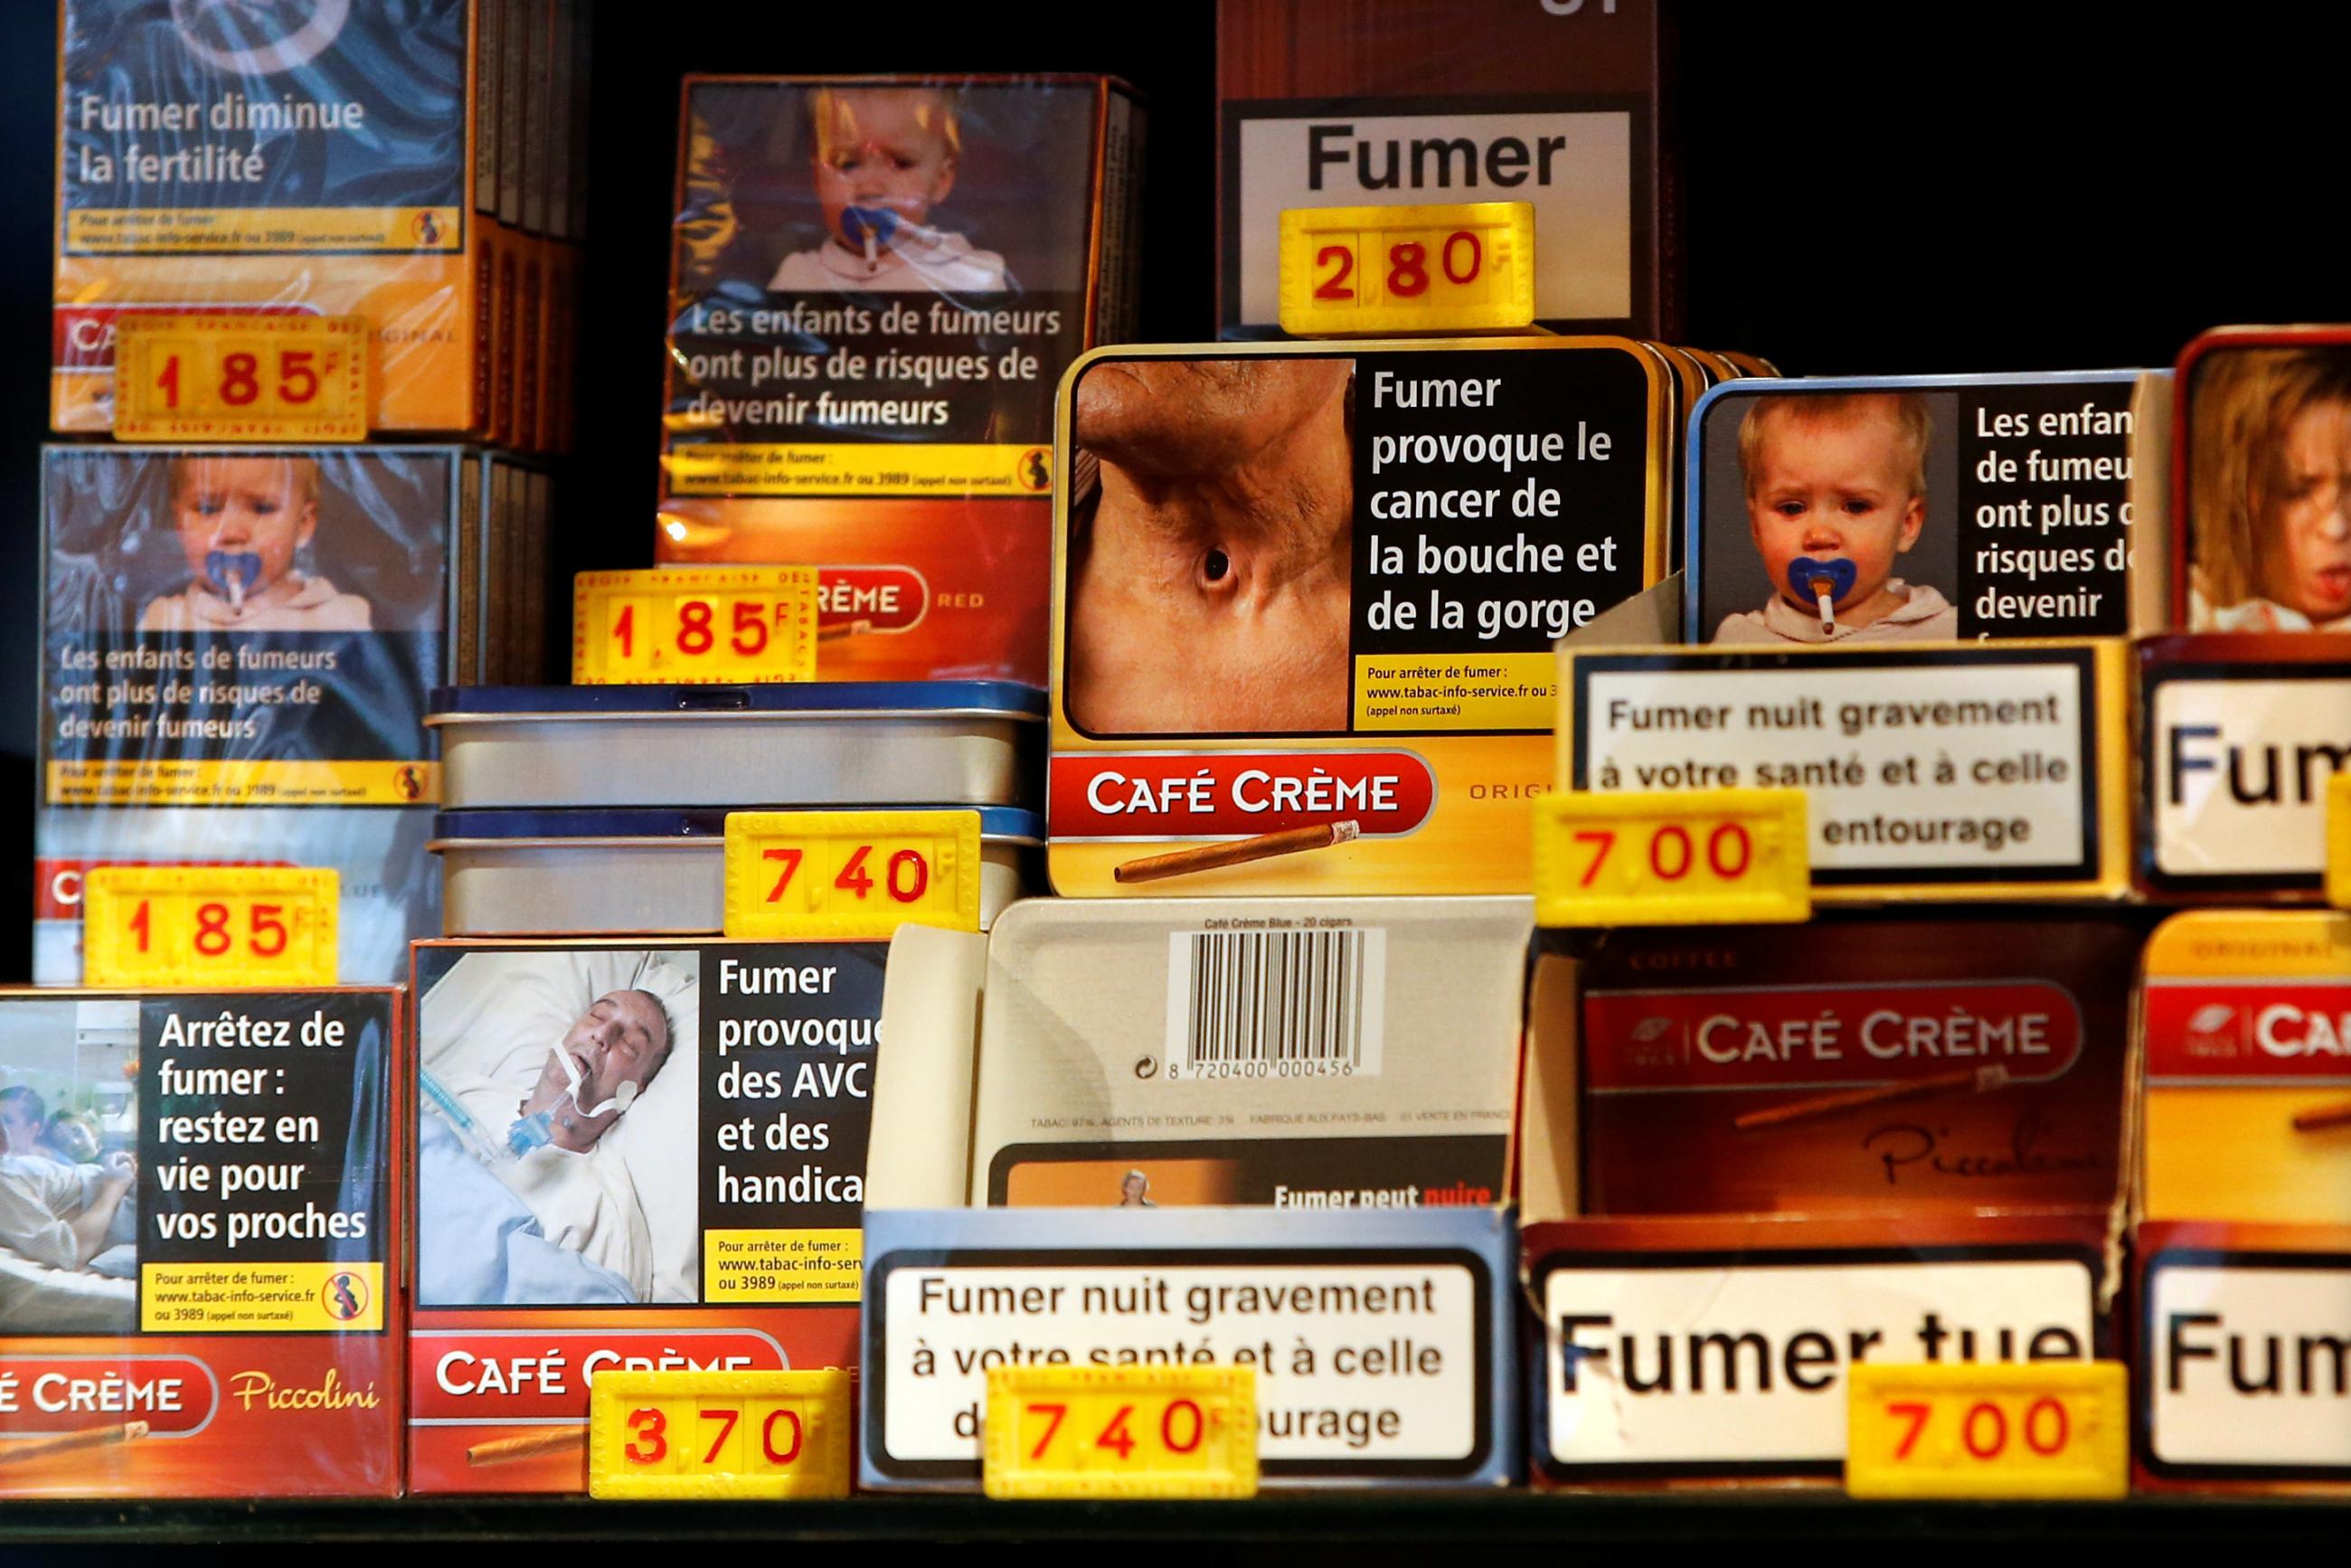 Small packs of cigars are stacked on top of each other in a display case at a tobacco store in France. The packaging shows graphic images of cancers and birth defects to discourage customers from purchasing the products. 